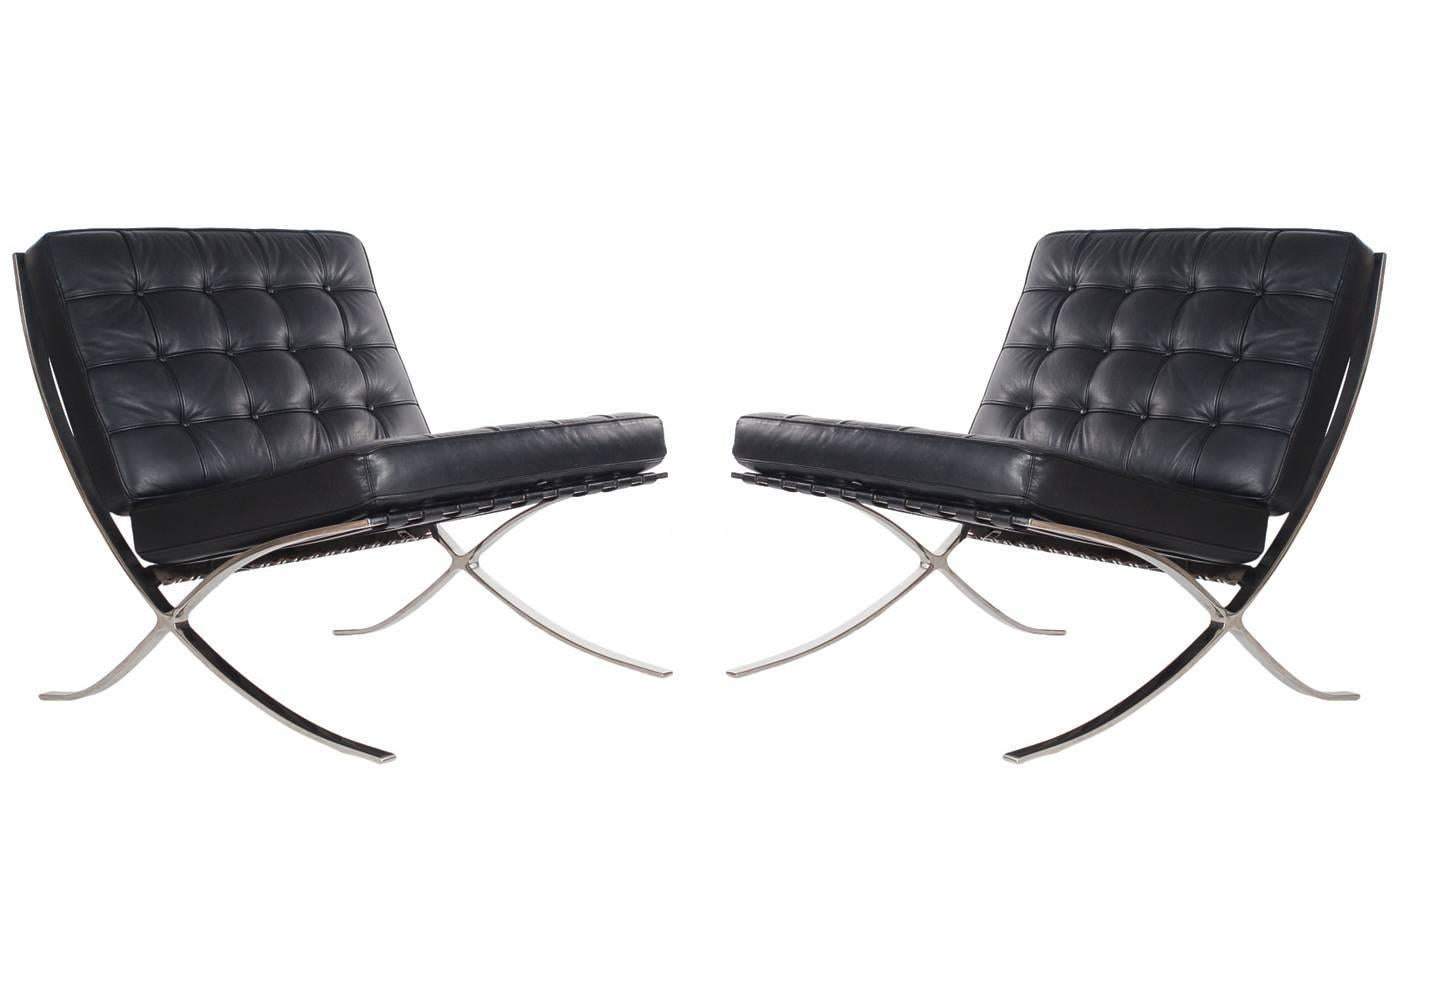 A matching authentic pair of Barcelona chairs designed by Mies van der Rohe and produced by Knoll Associates. These feature black leather cushions and the more expensive polished stainless frames rather than chrome-plated steel. Paper label and